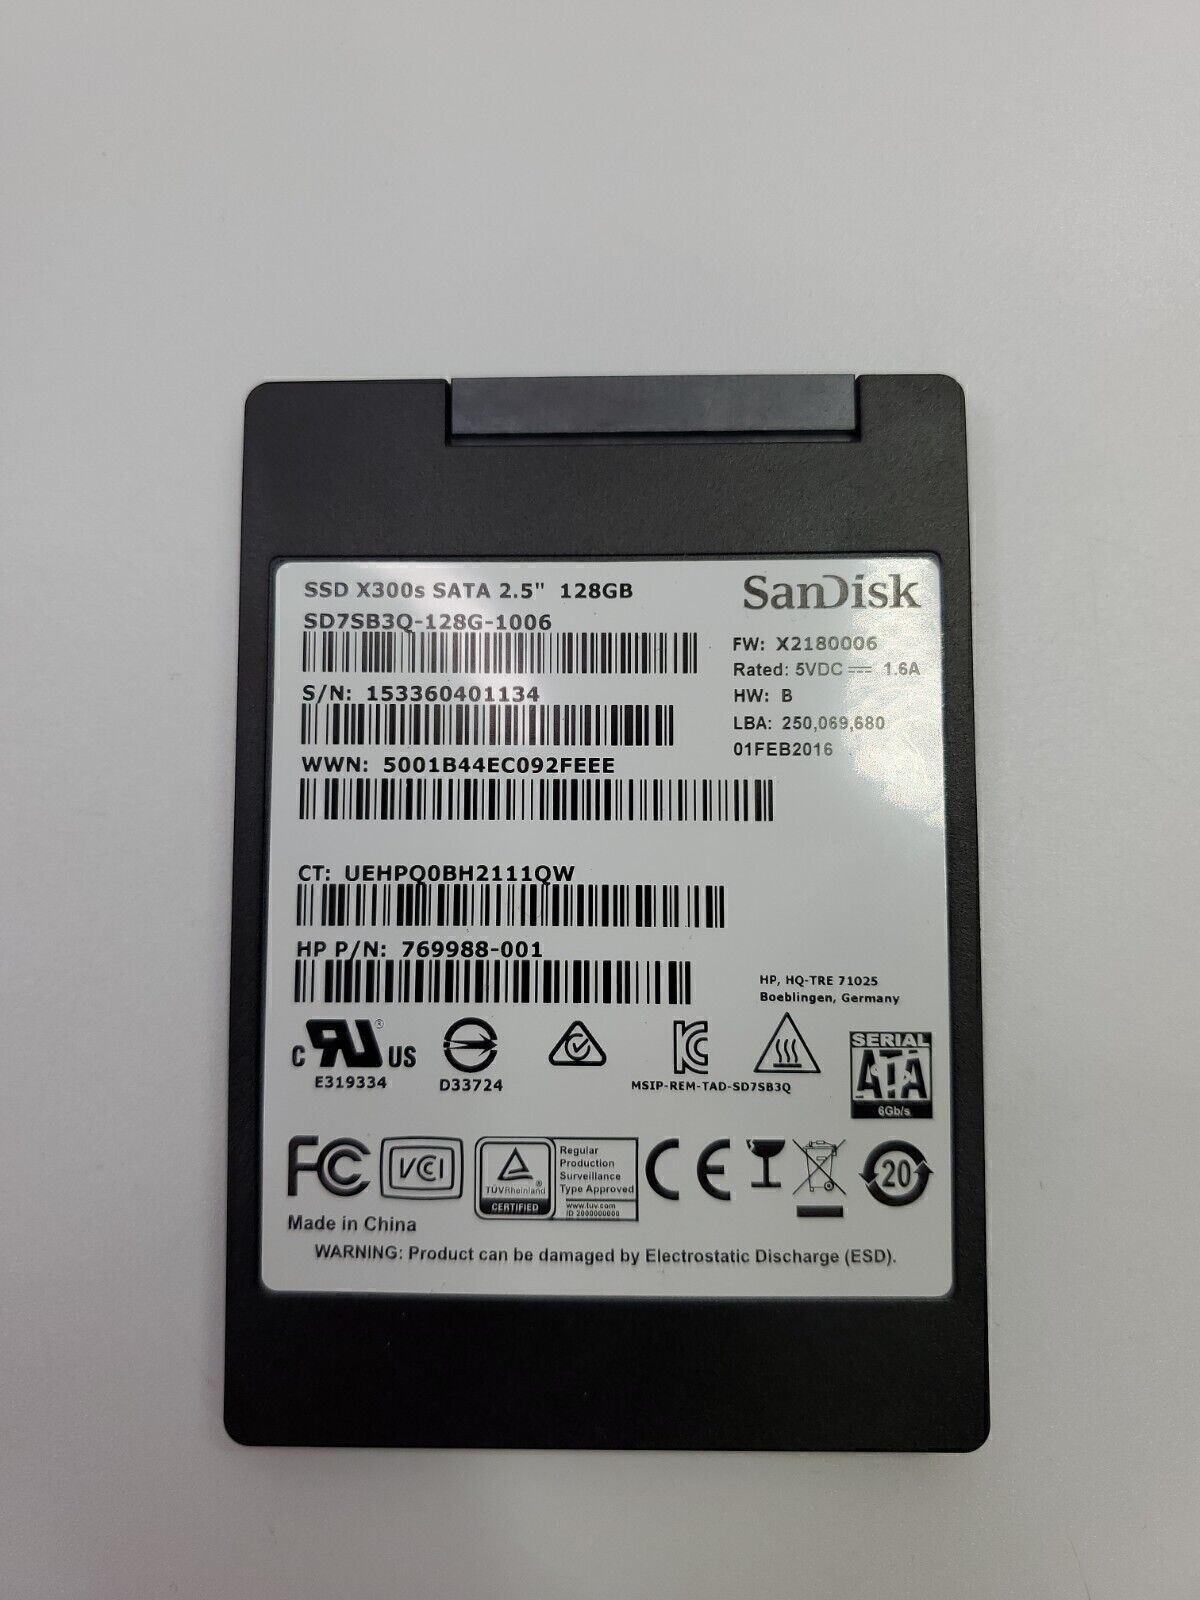 Sandisk 128GB X300s 2.5in SSD SATA III Solid State SD7SB3Q-128G-1006